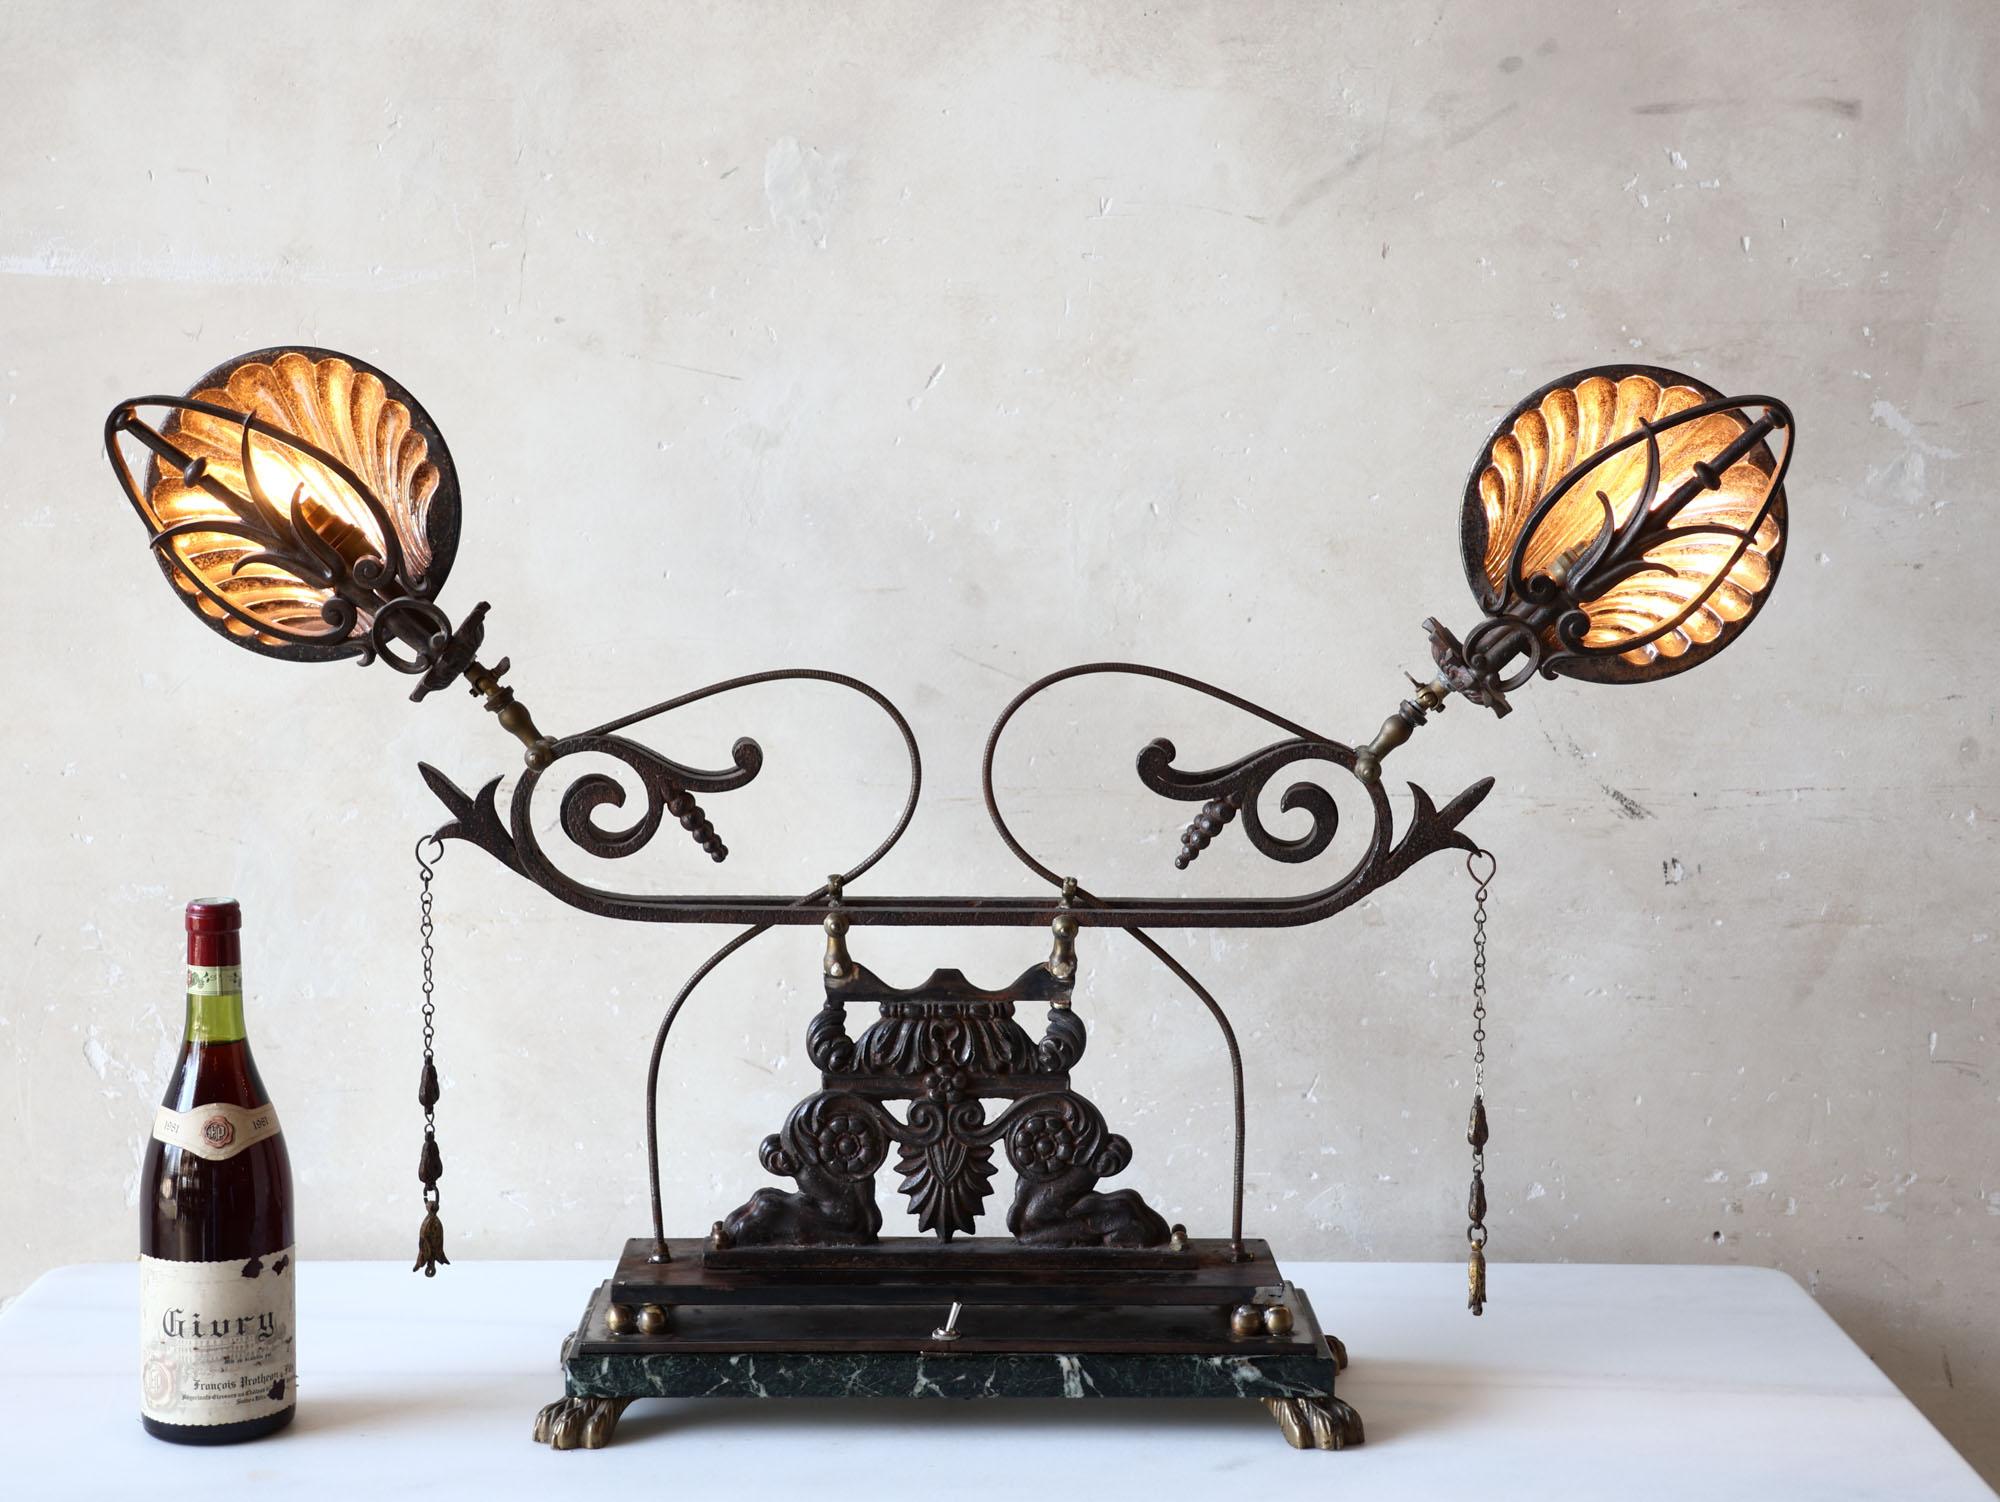 Dutch Industrial Double Table Lamp with 19th Century and Art Deco Elements For Sale